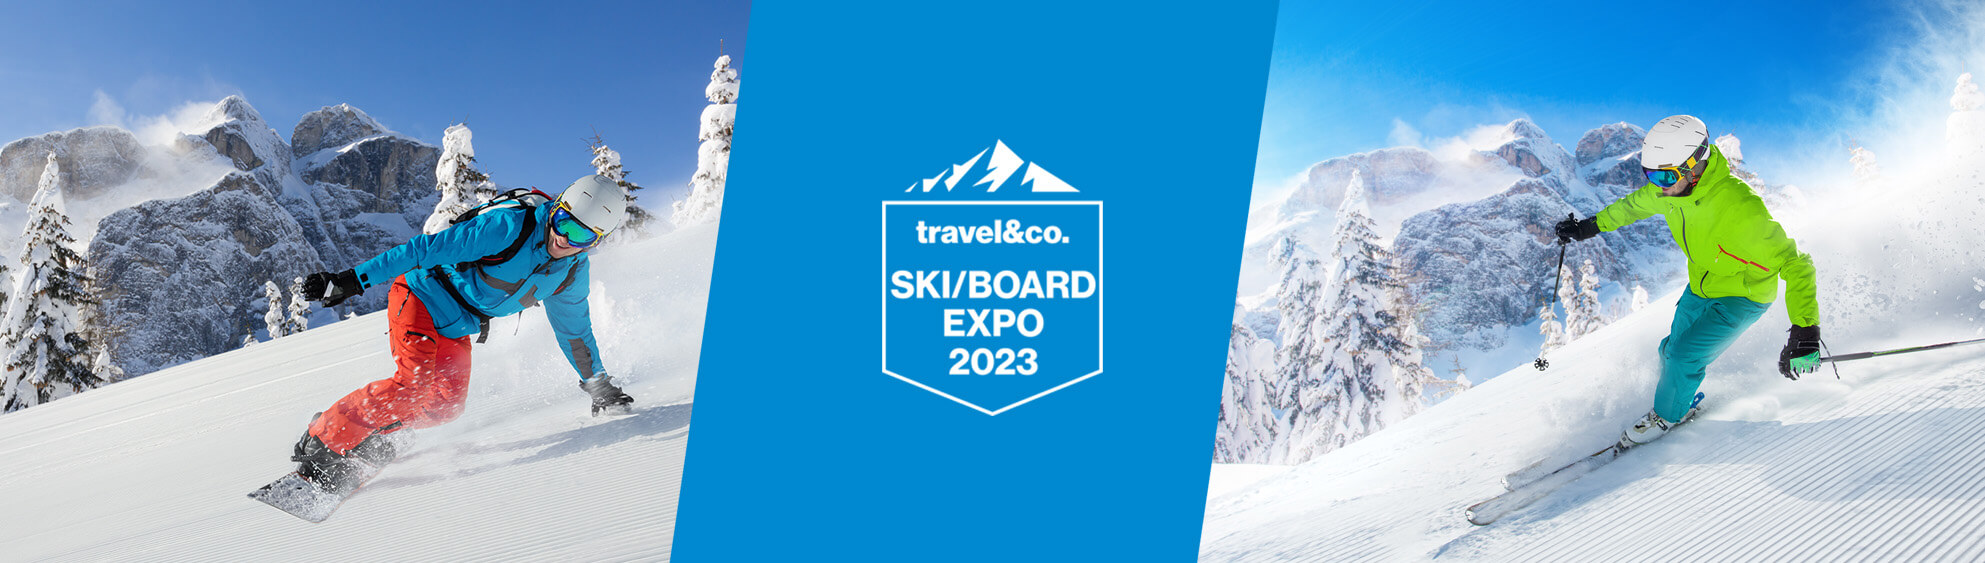 Ski and Board Expo Auckland 2023 travel&co